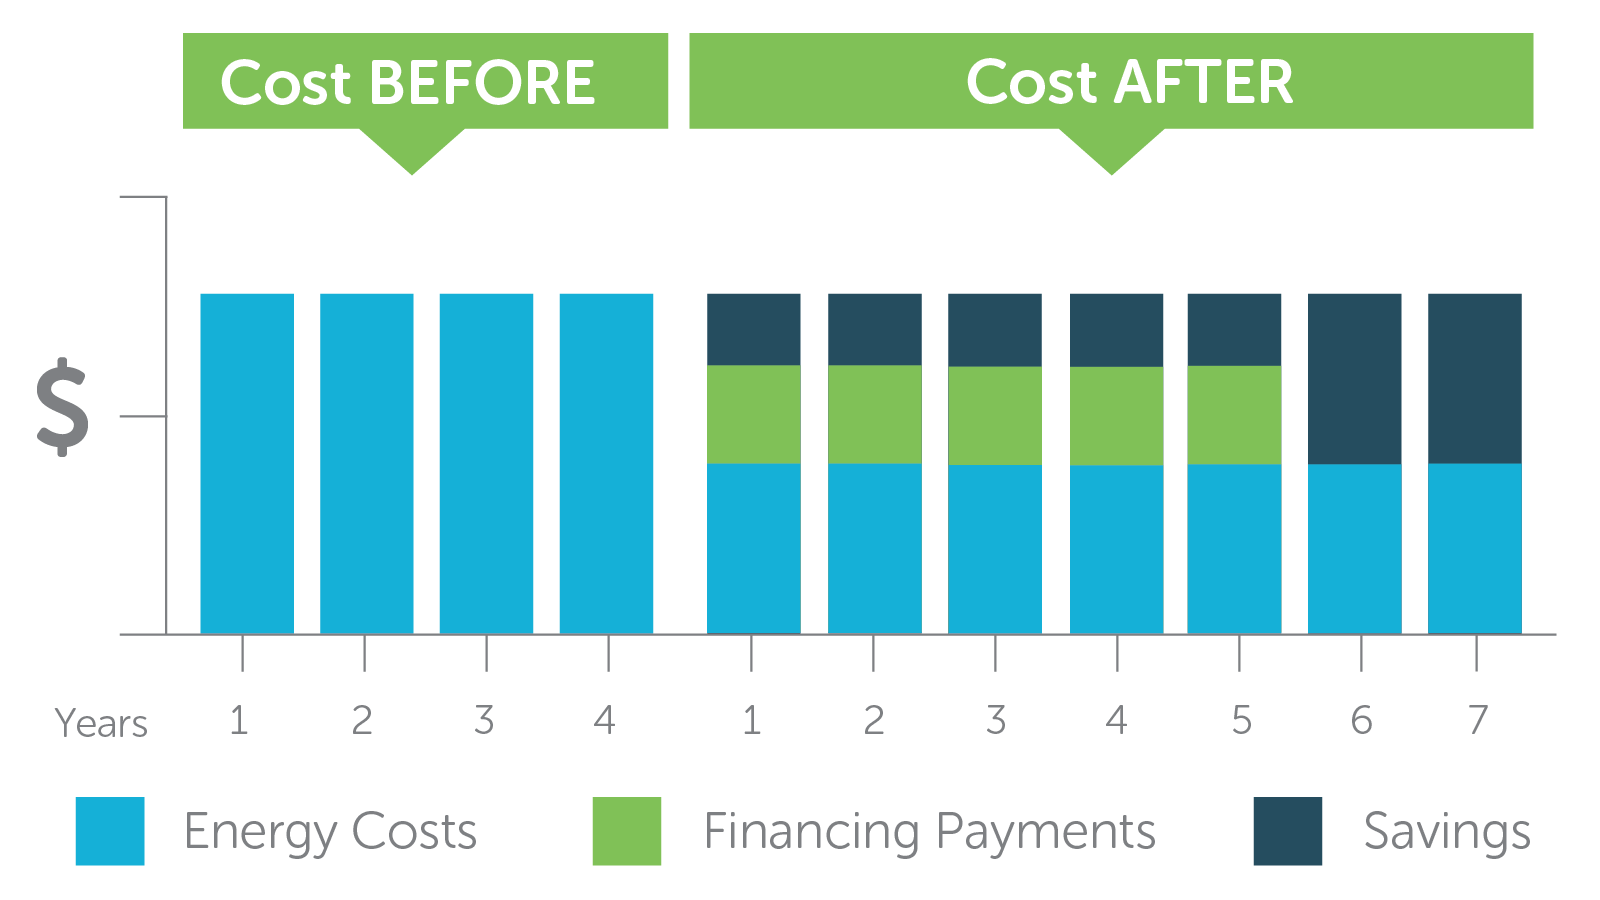 A chart showing an example of savings over time where cost savings start at year one and increase after financing payments are finished. 